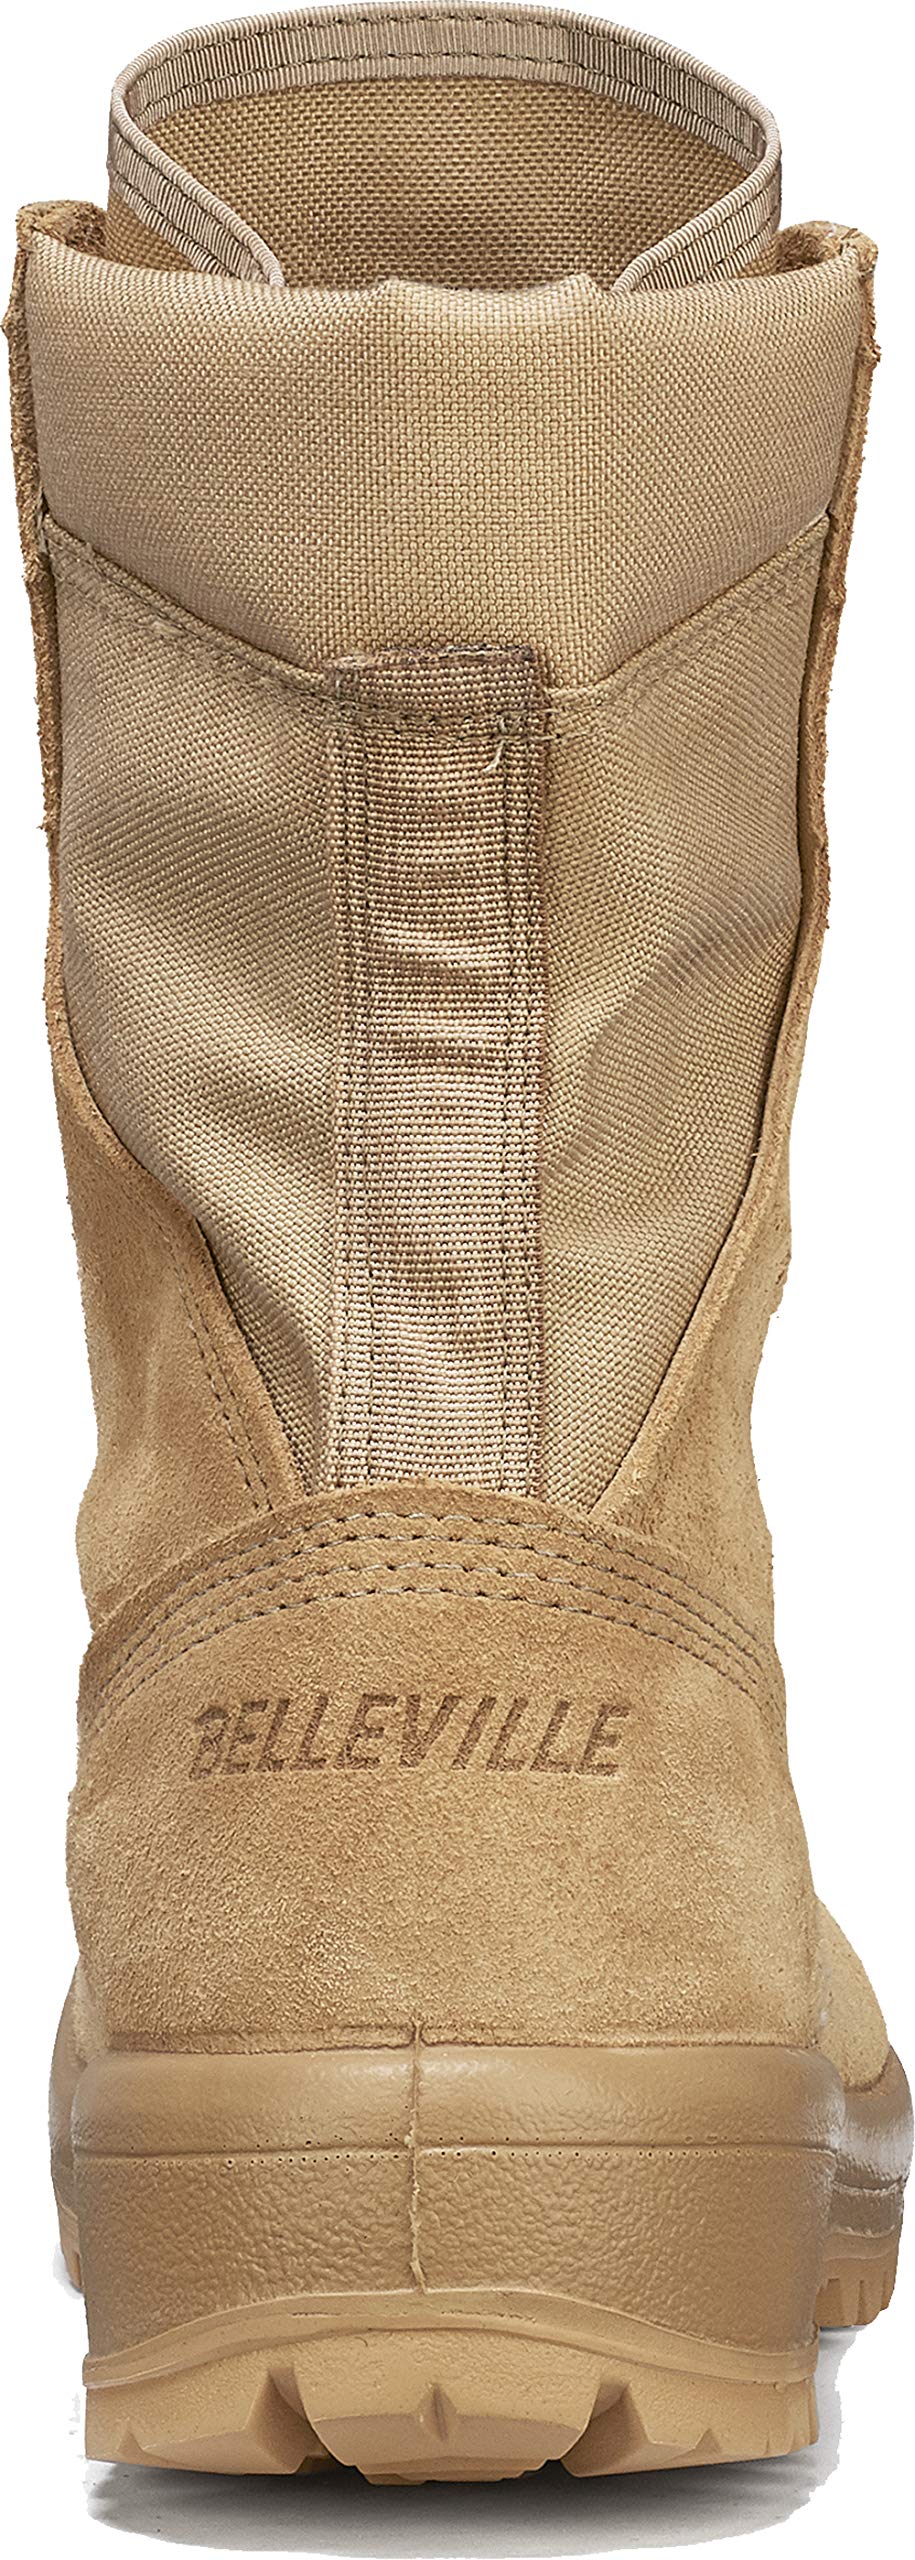 Belleville 390DES 8 Inch Hot Weather Combat Boot - AR 670-1 Compliant Desert Tan Cattlehide Leather Army Boots for Men with Vibram Sierra Outsole and Vanguard Premium Cushioning